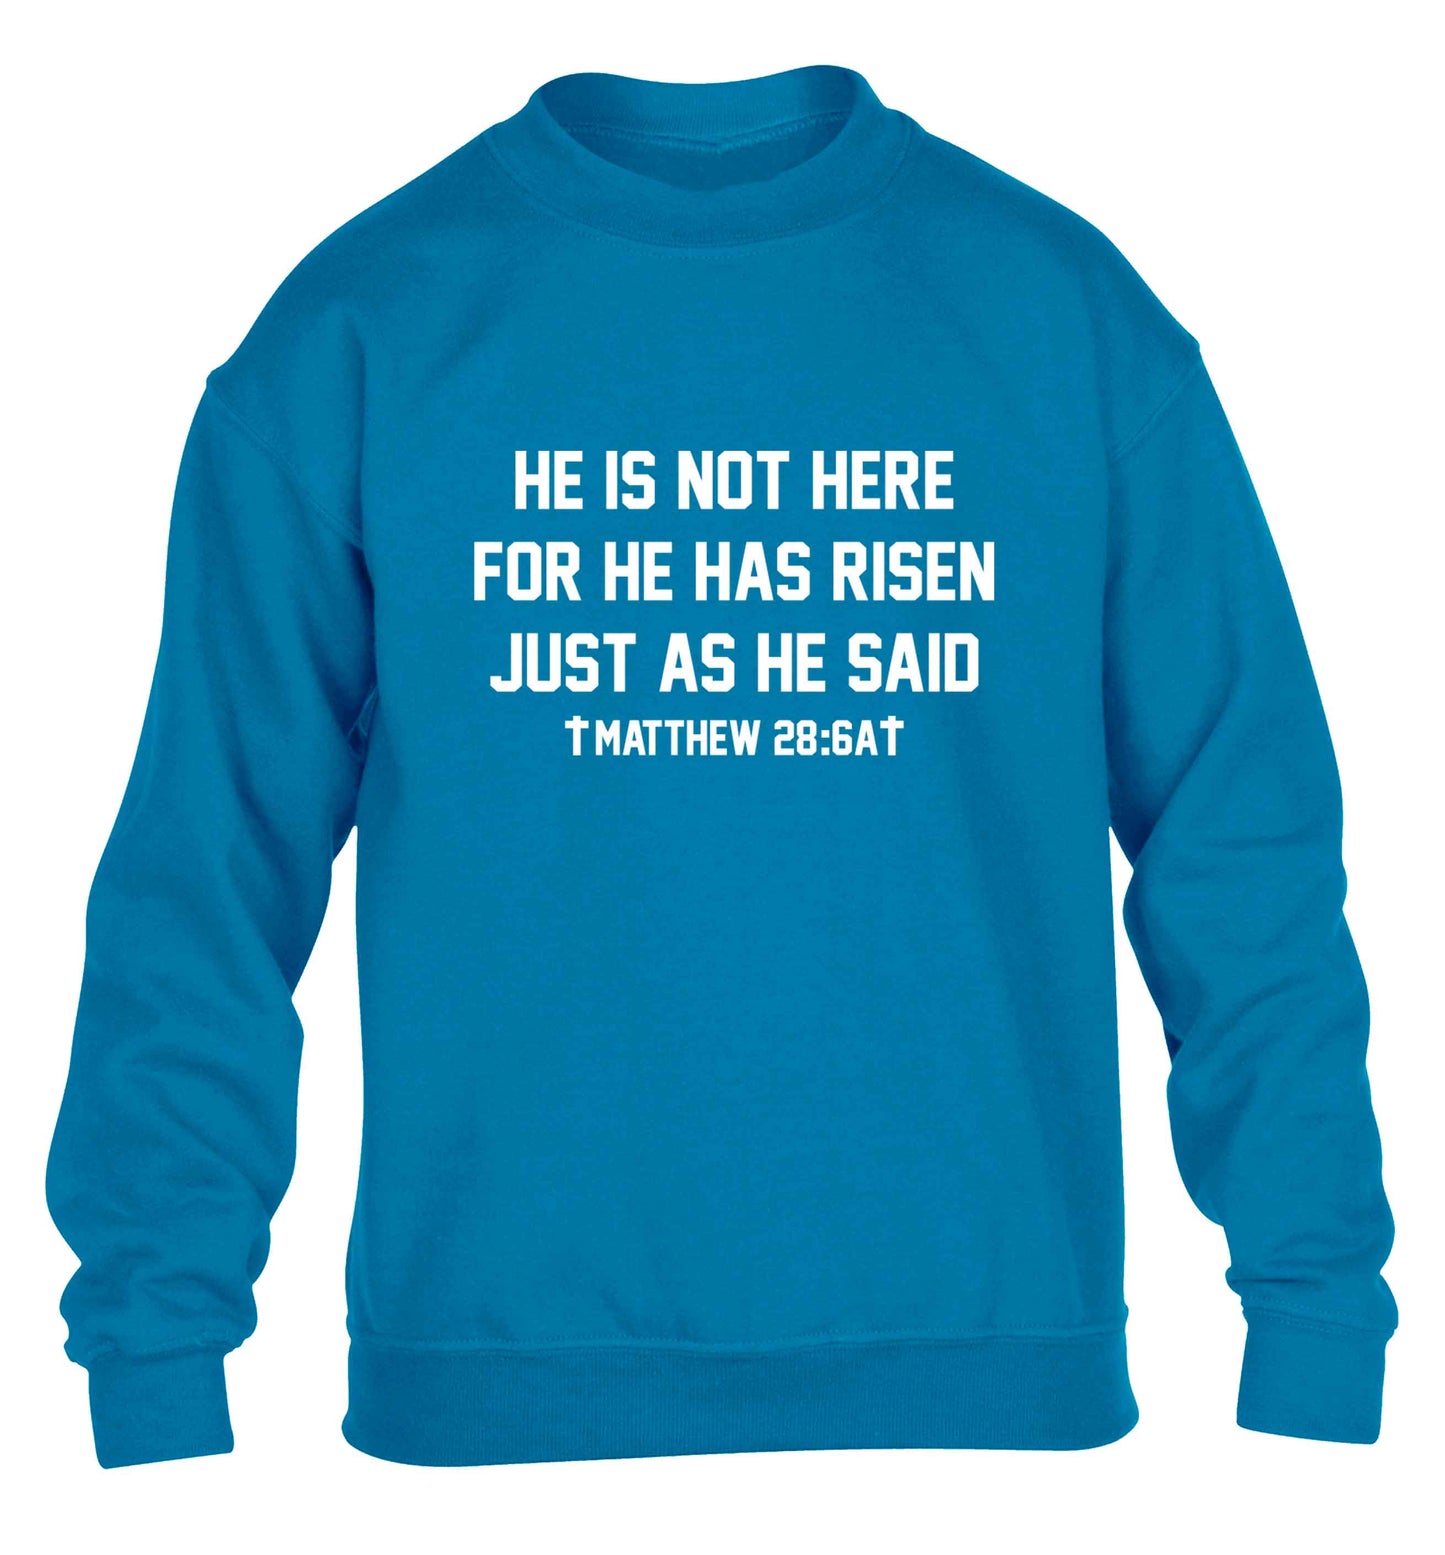 He is not here for he has risen just as he said matthew 28:6A children's blue sweater 12-13 Years